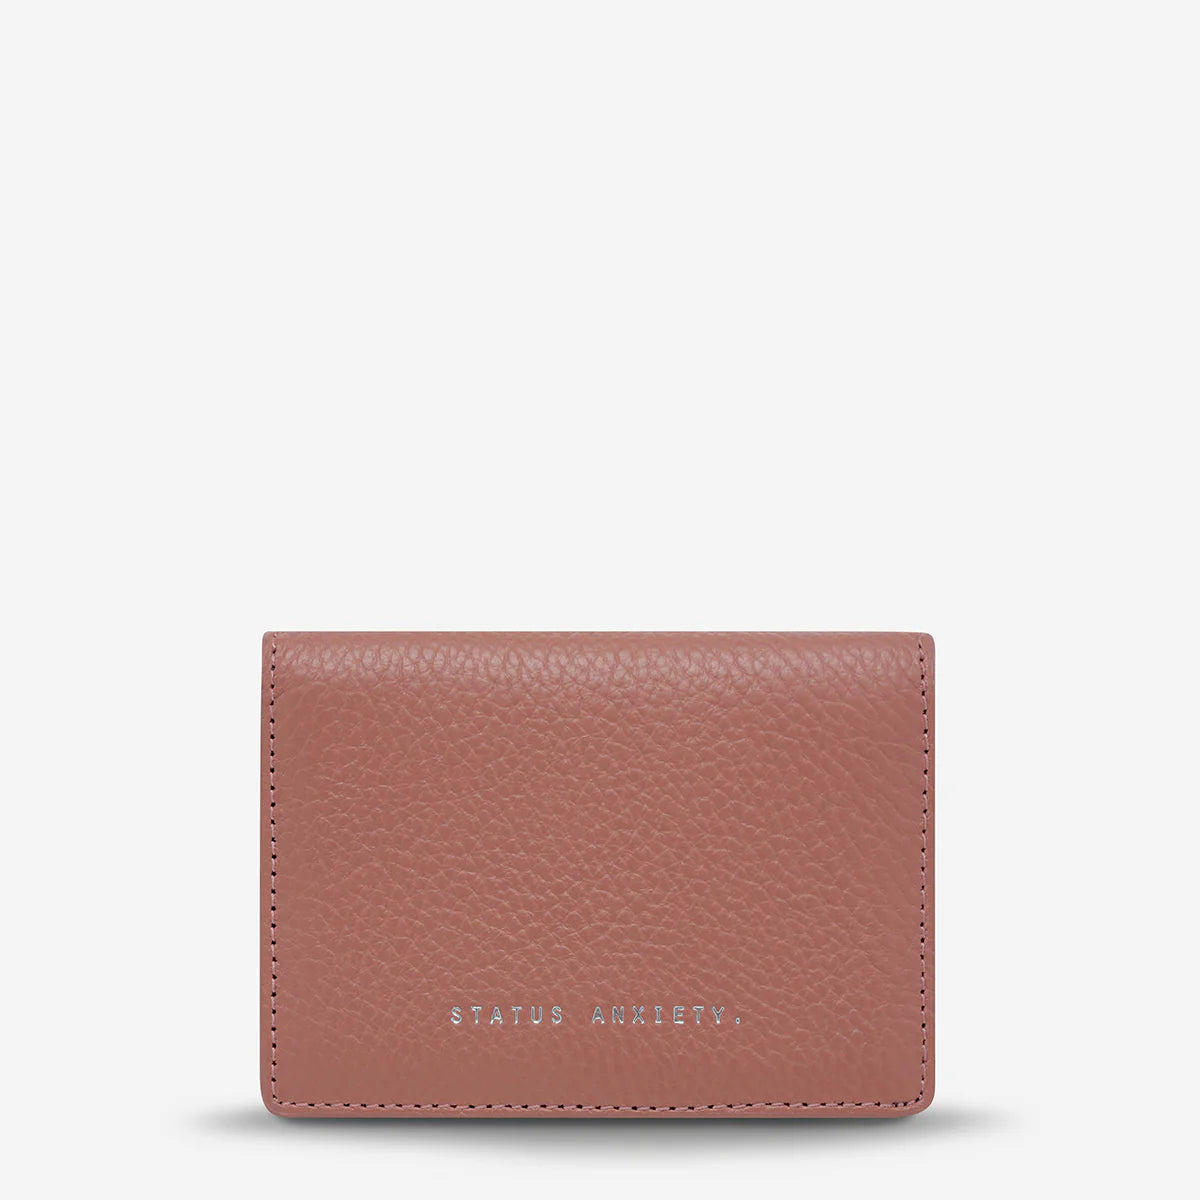 Status Anxiety Easy Does It Wallet - Multiple options